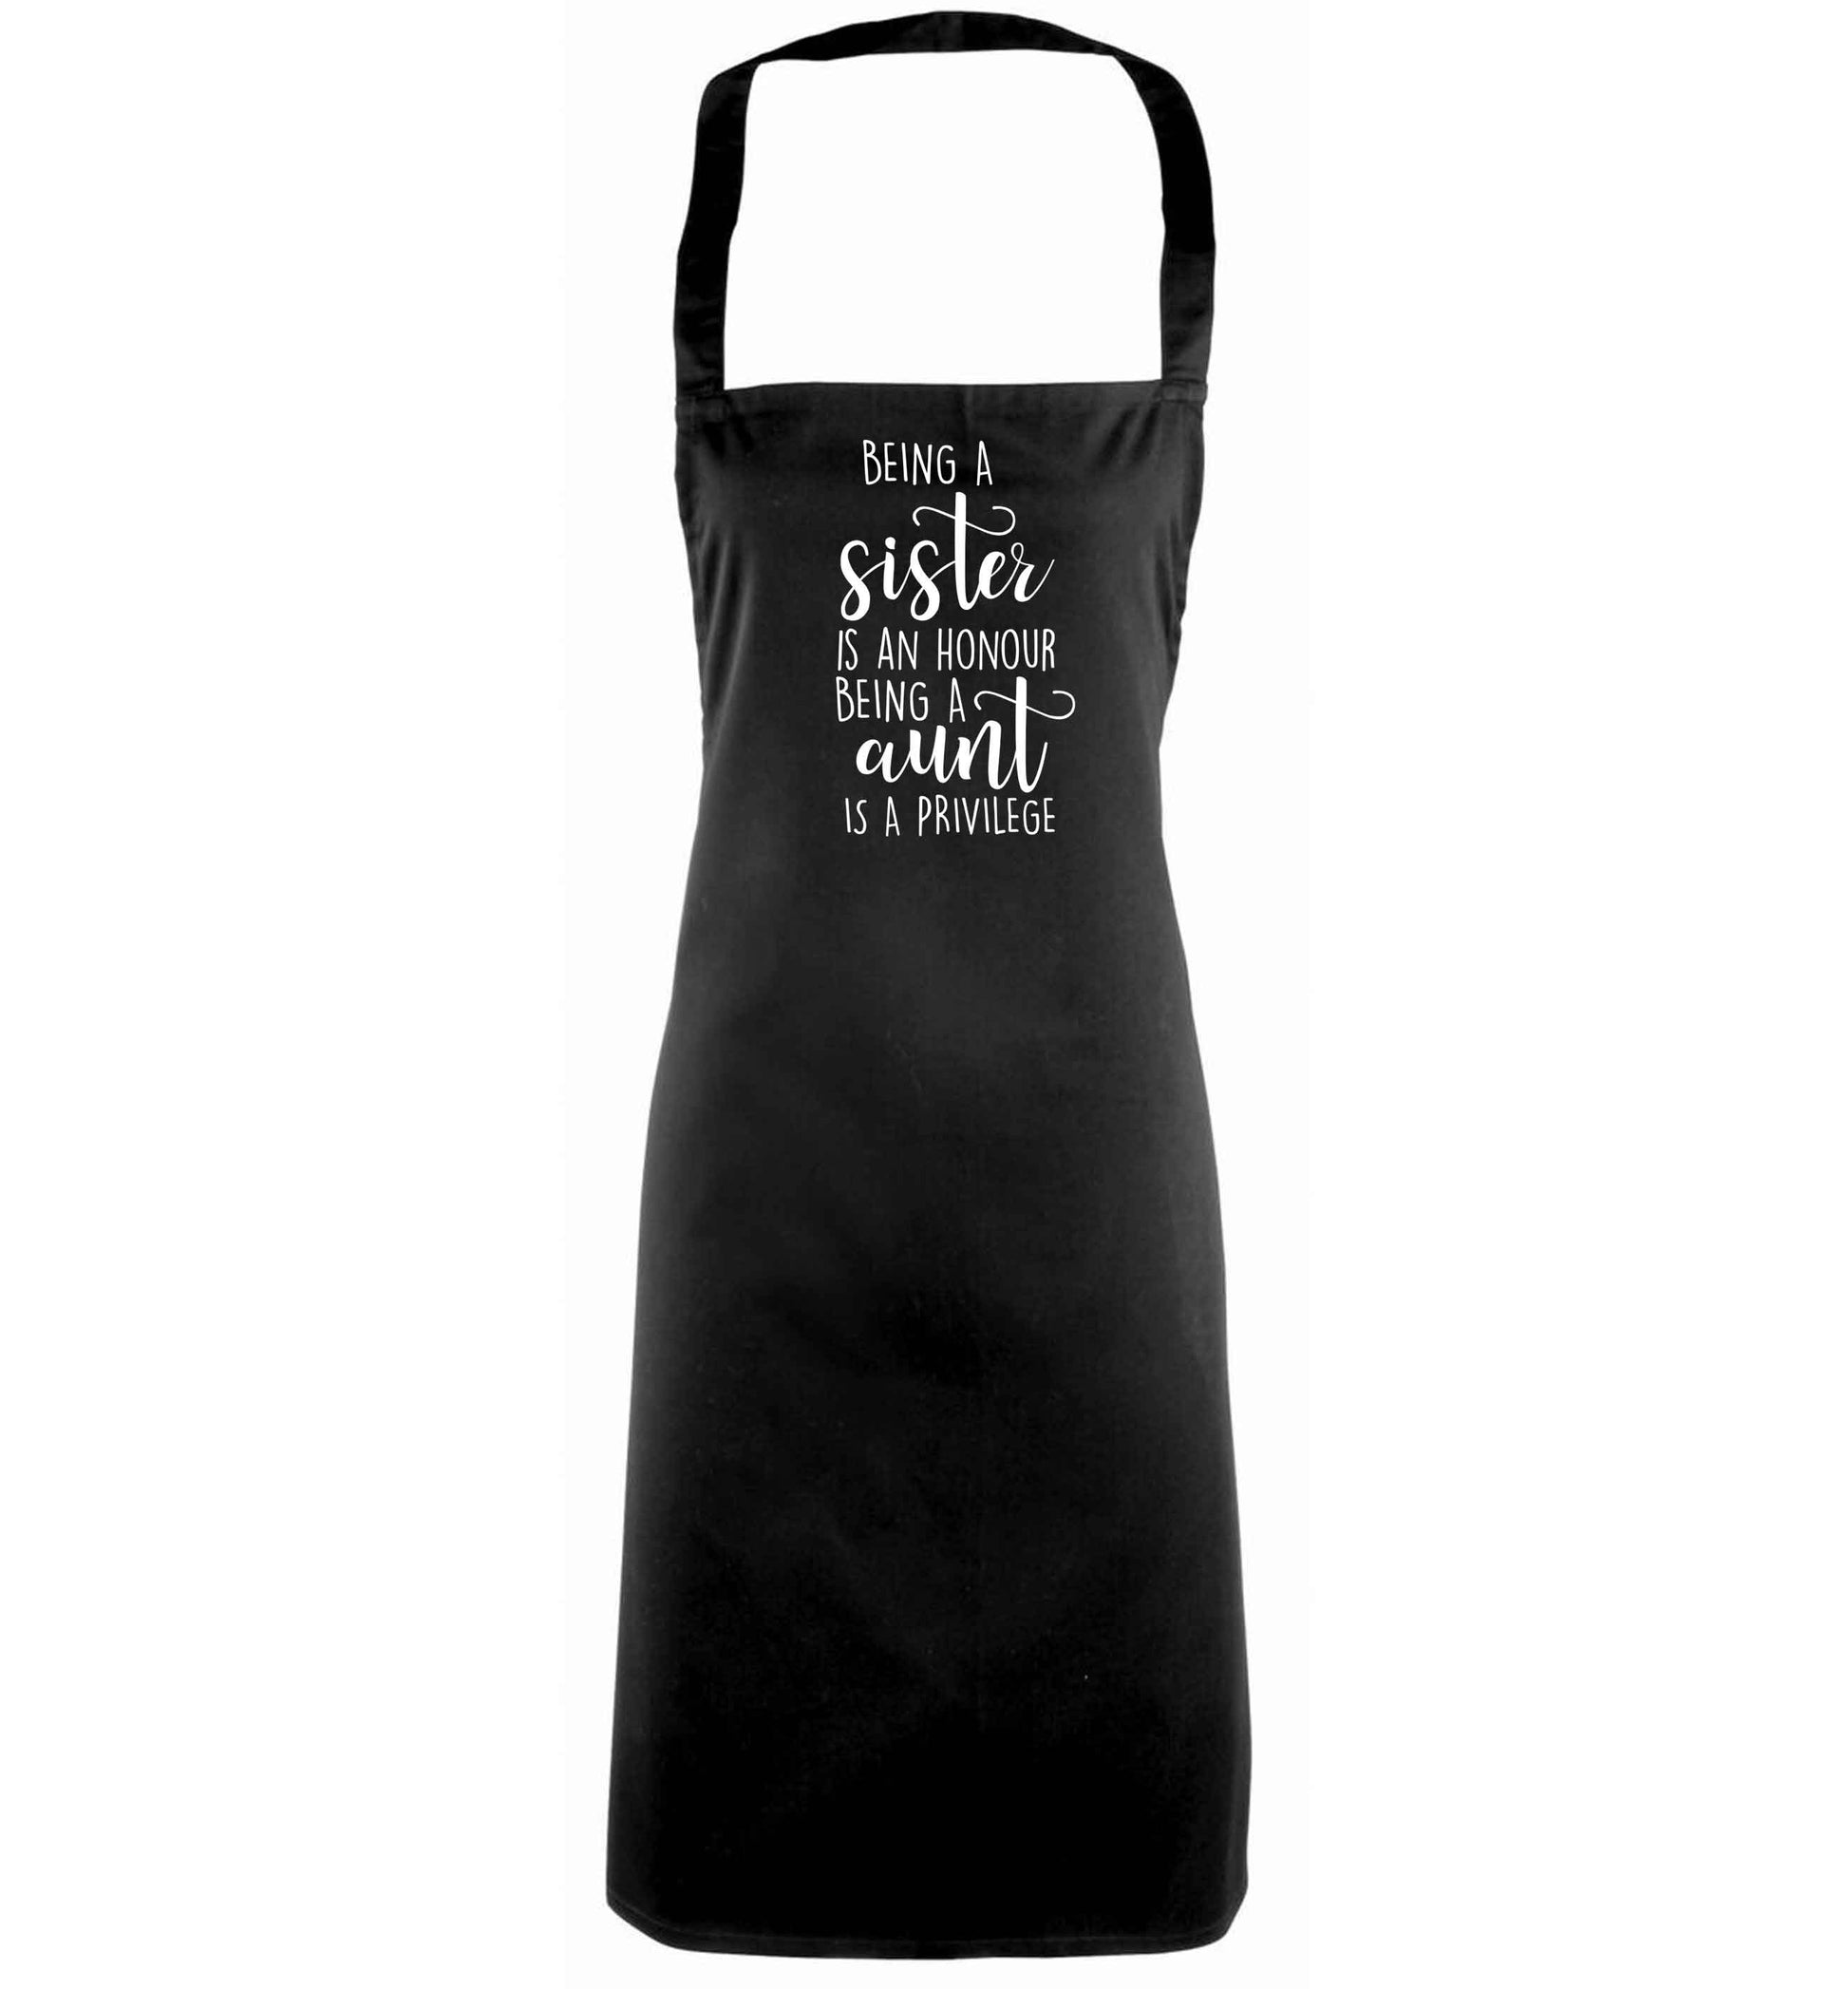 Being a sister is an honour being an auntie is a privilege black apron